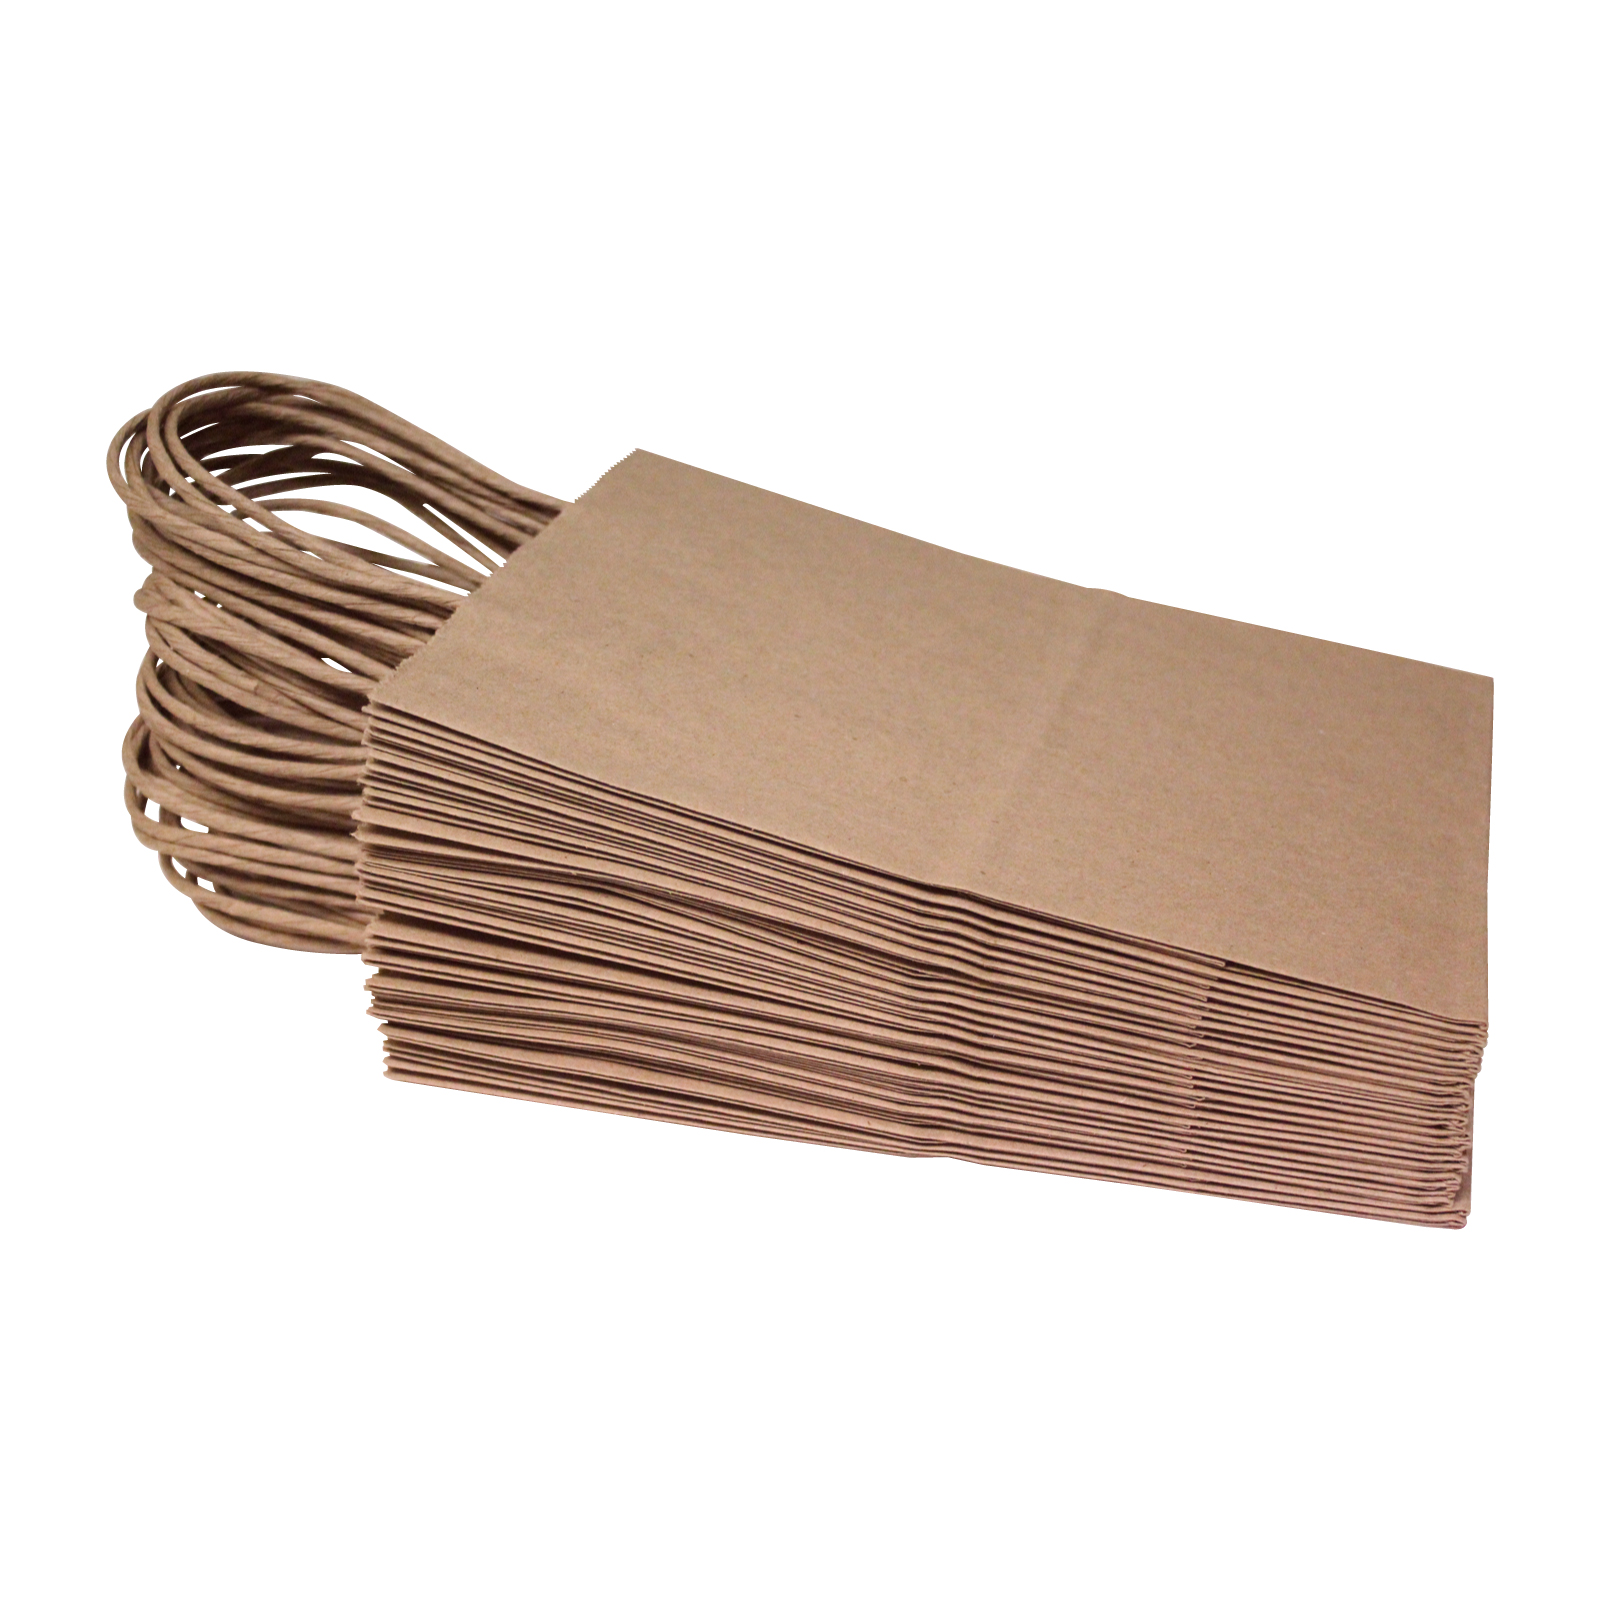 8"x4.75"x10", 50 Piece, Natural Brown Kraft Paper Bags, Shopping, Mechandise, Party, Gift Bags - image 4 of 4